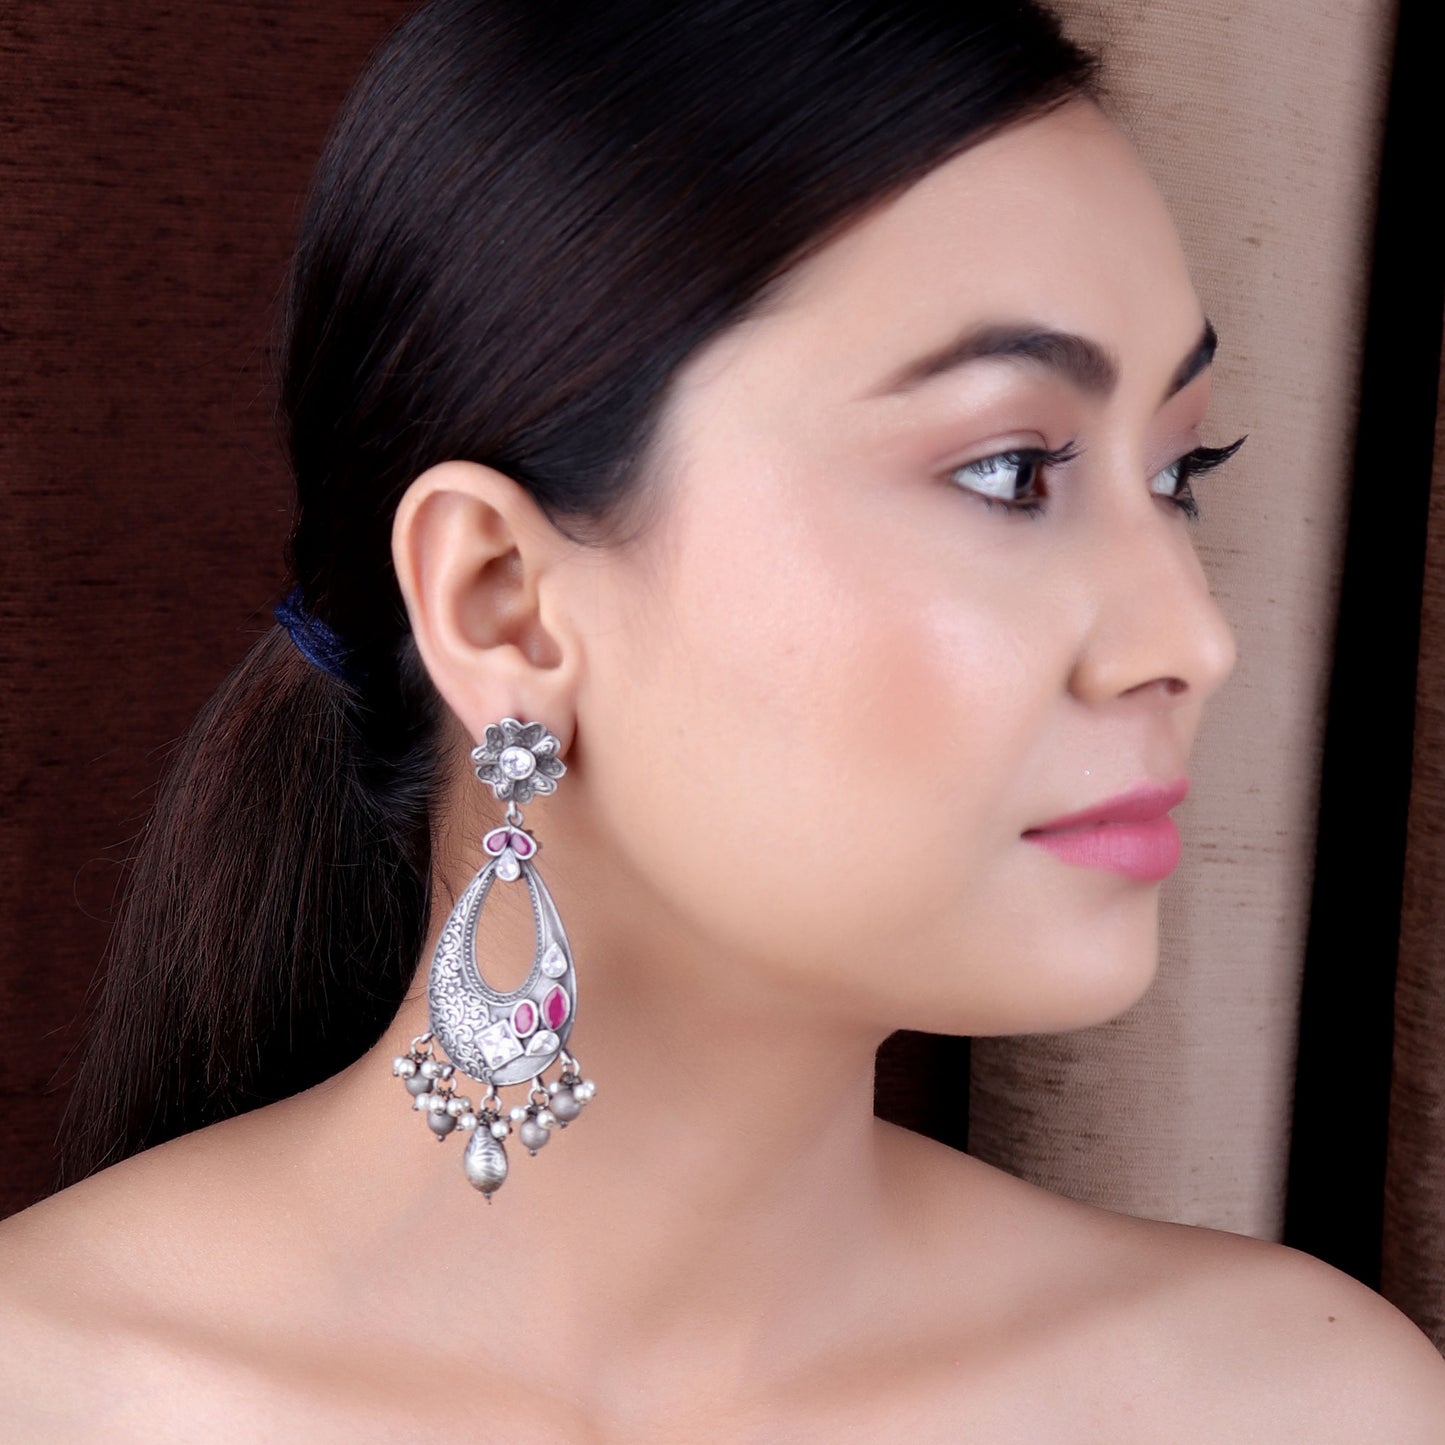 Earrings,The Paradise Silver Look Alike Earrings with Magenta & White Stone - Cippele Multi Store